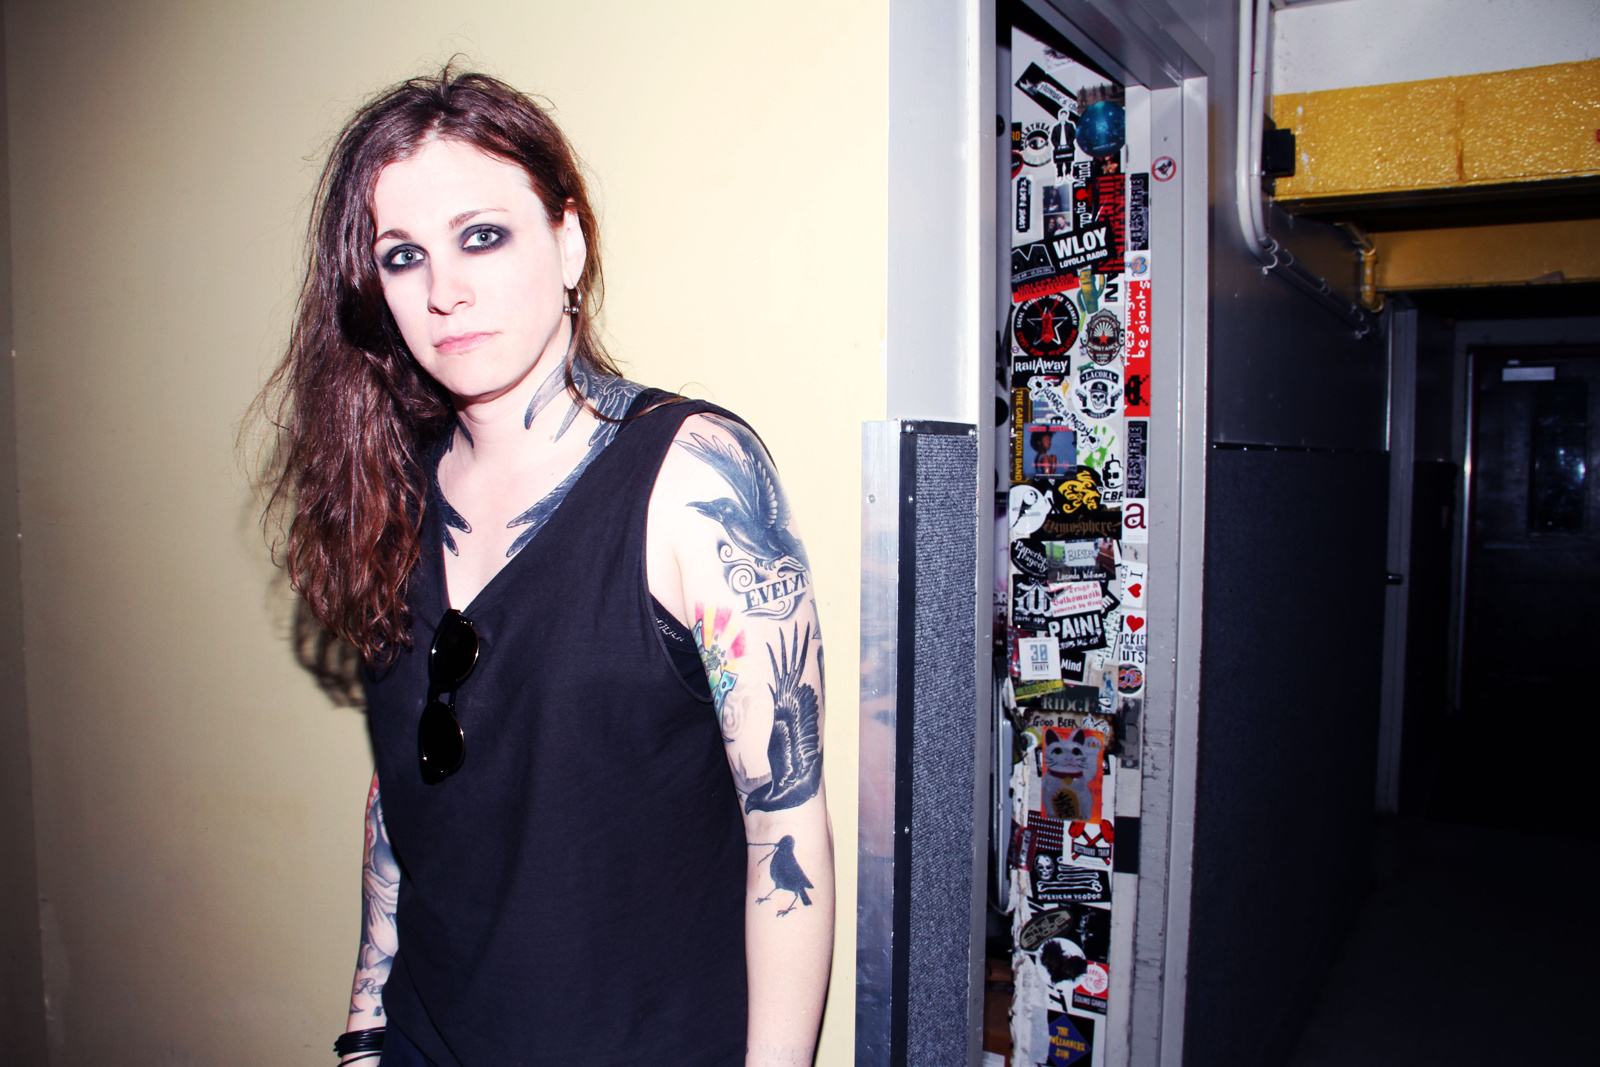 Laura Jane Grace literally against me posing with the tattoo she drew on me  in May Taken at Rasputin Records in Fresno California Au  Music stuff  Poses Singer